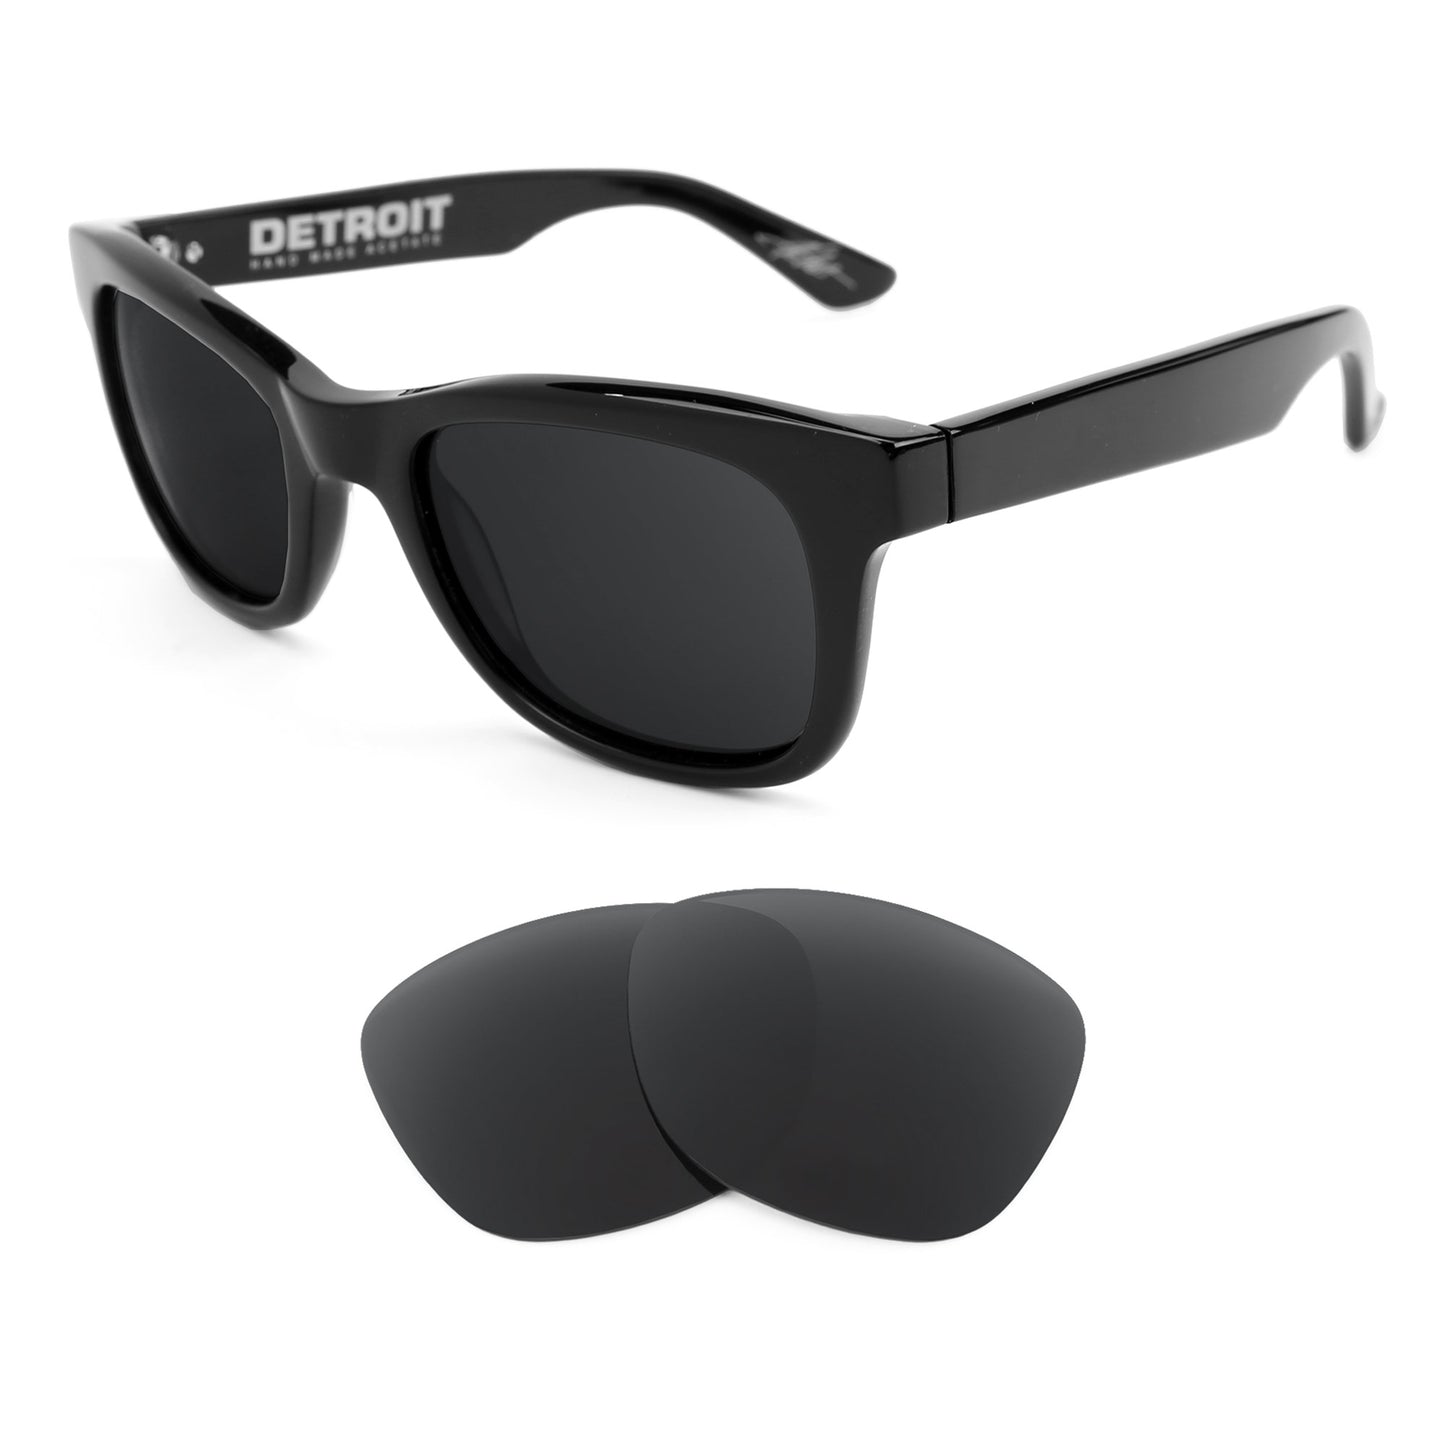 Electric Detroit sunglasses with replacement lenses